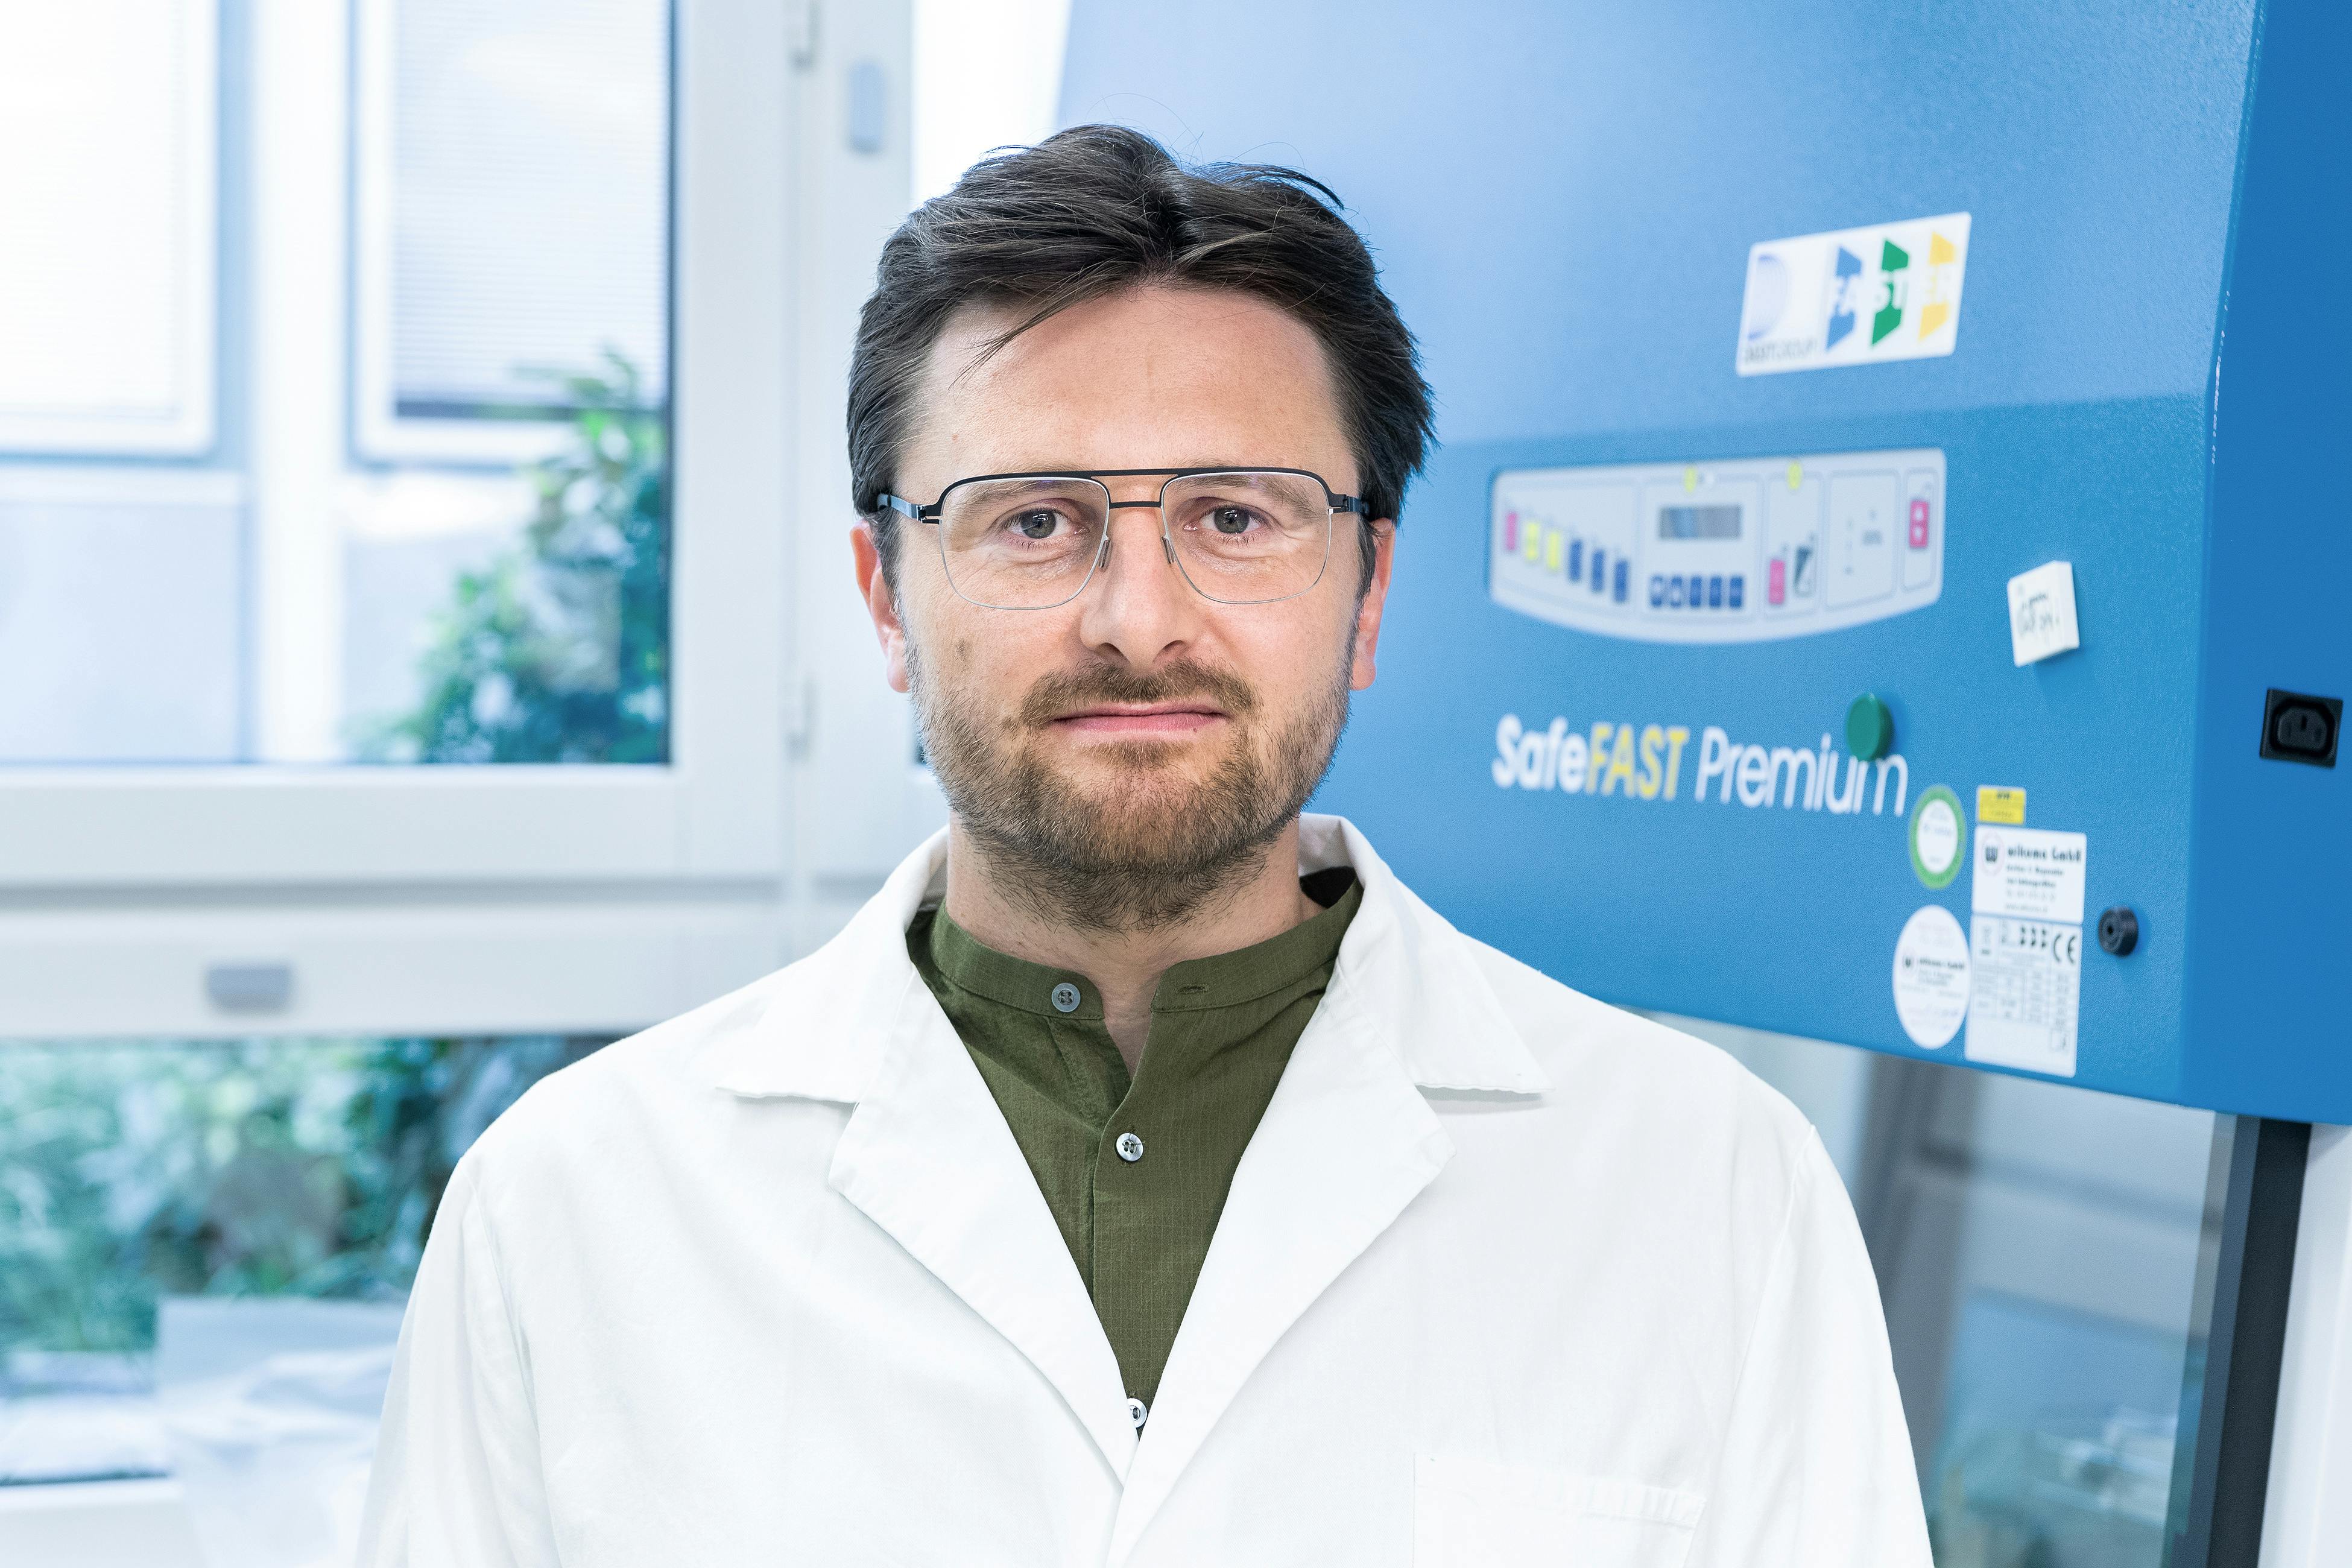 Dr. Matthew Dunne is a senior scientist and senior teaching and research assistant at the Institute of Food, Nutrition and Health at ETH Zurich.